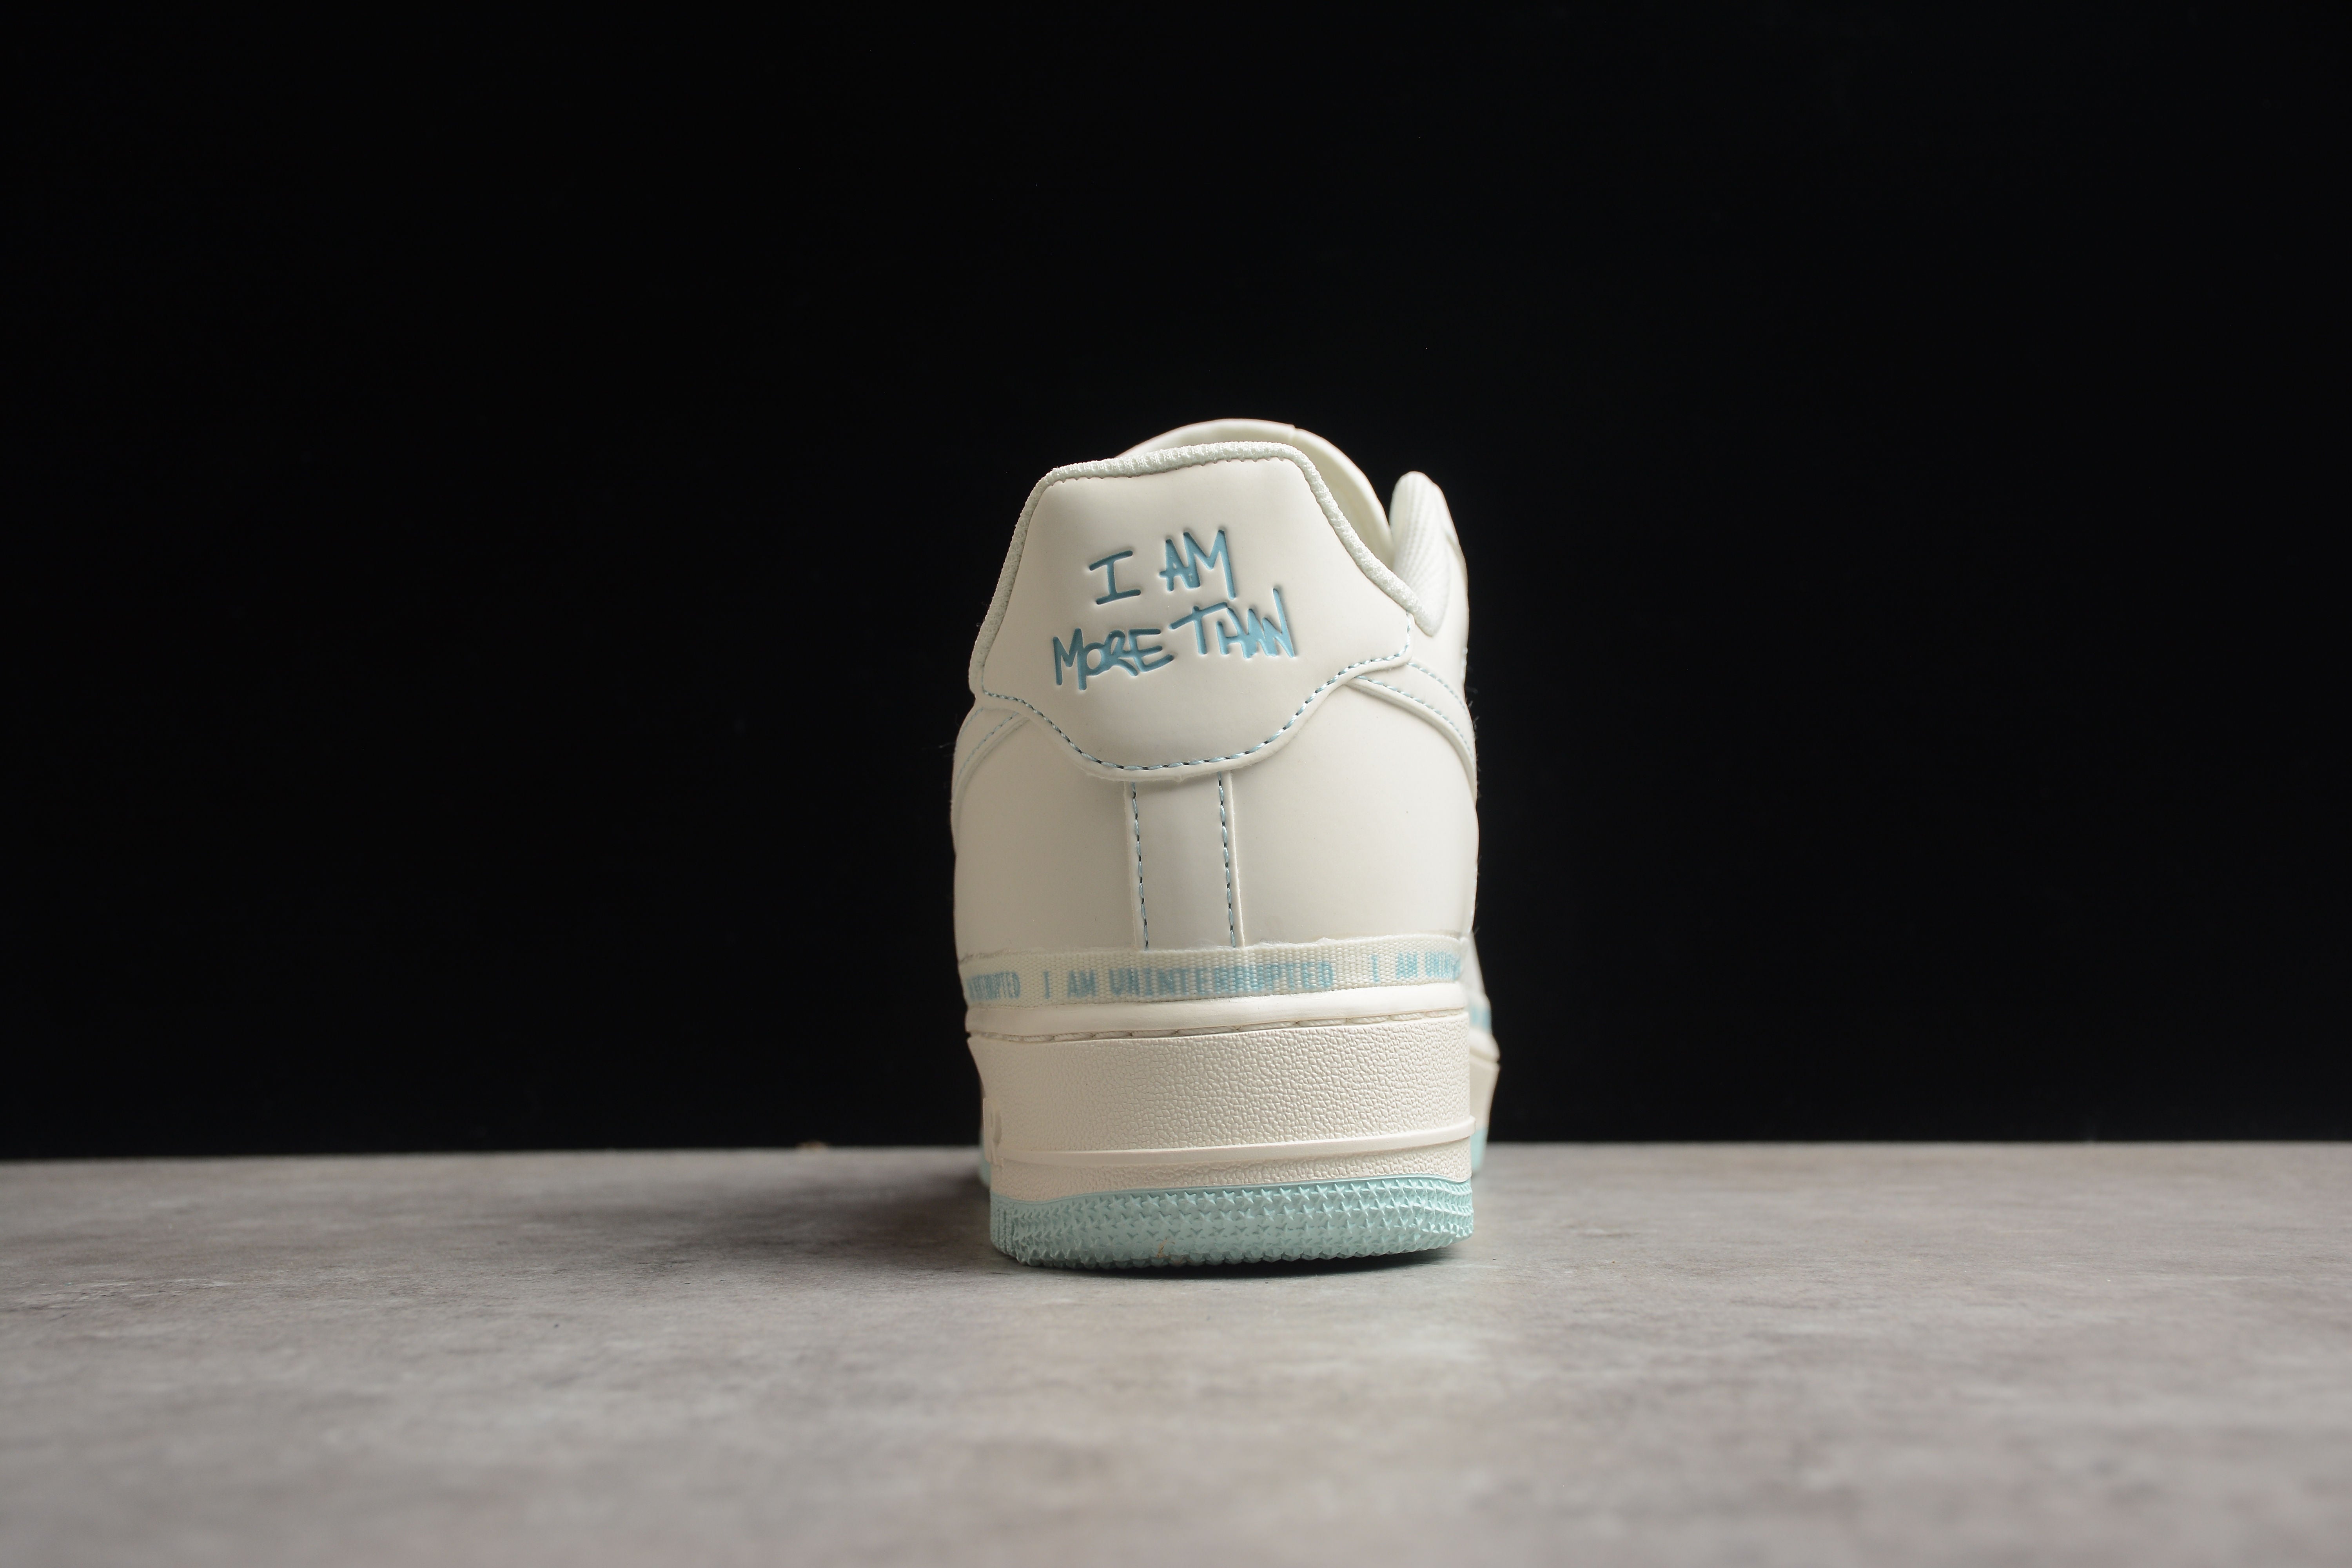 Nike airforce A1 white and light blue shoes